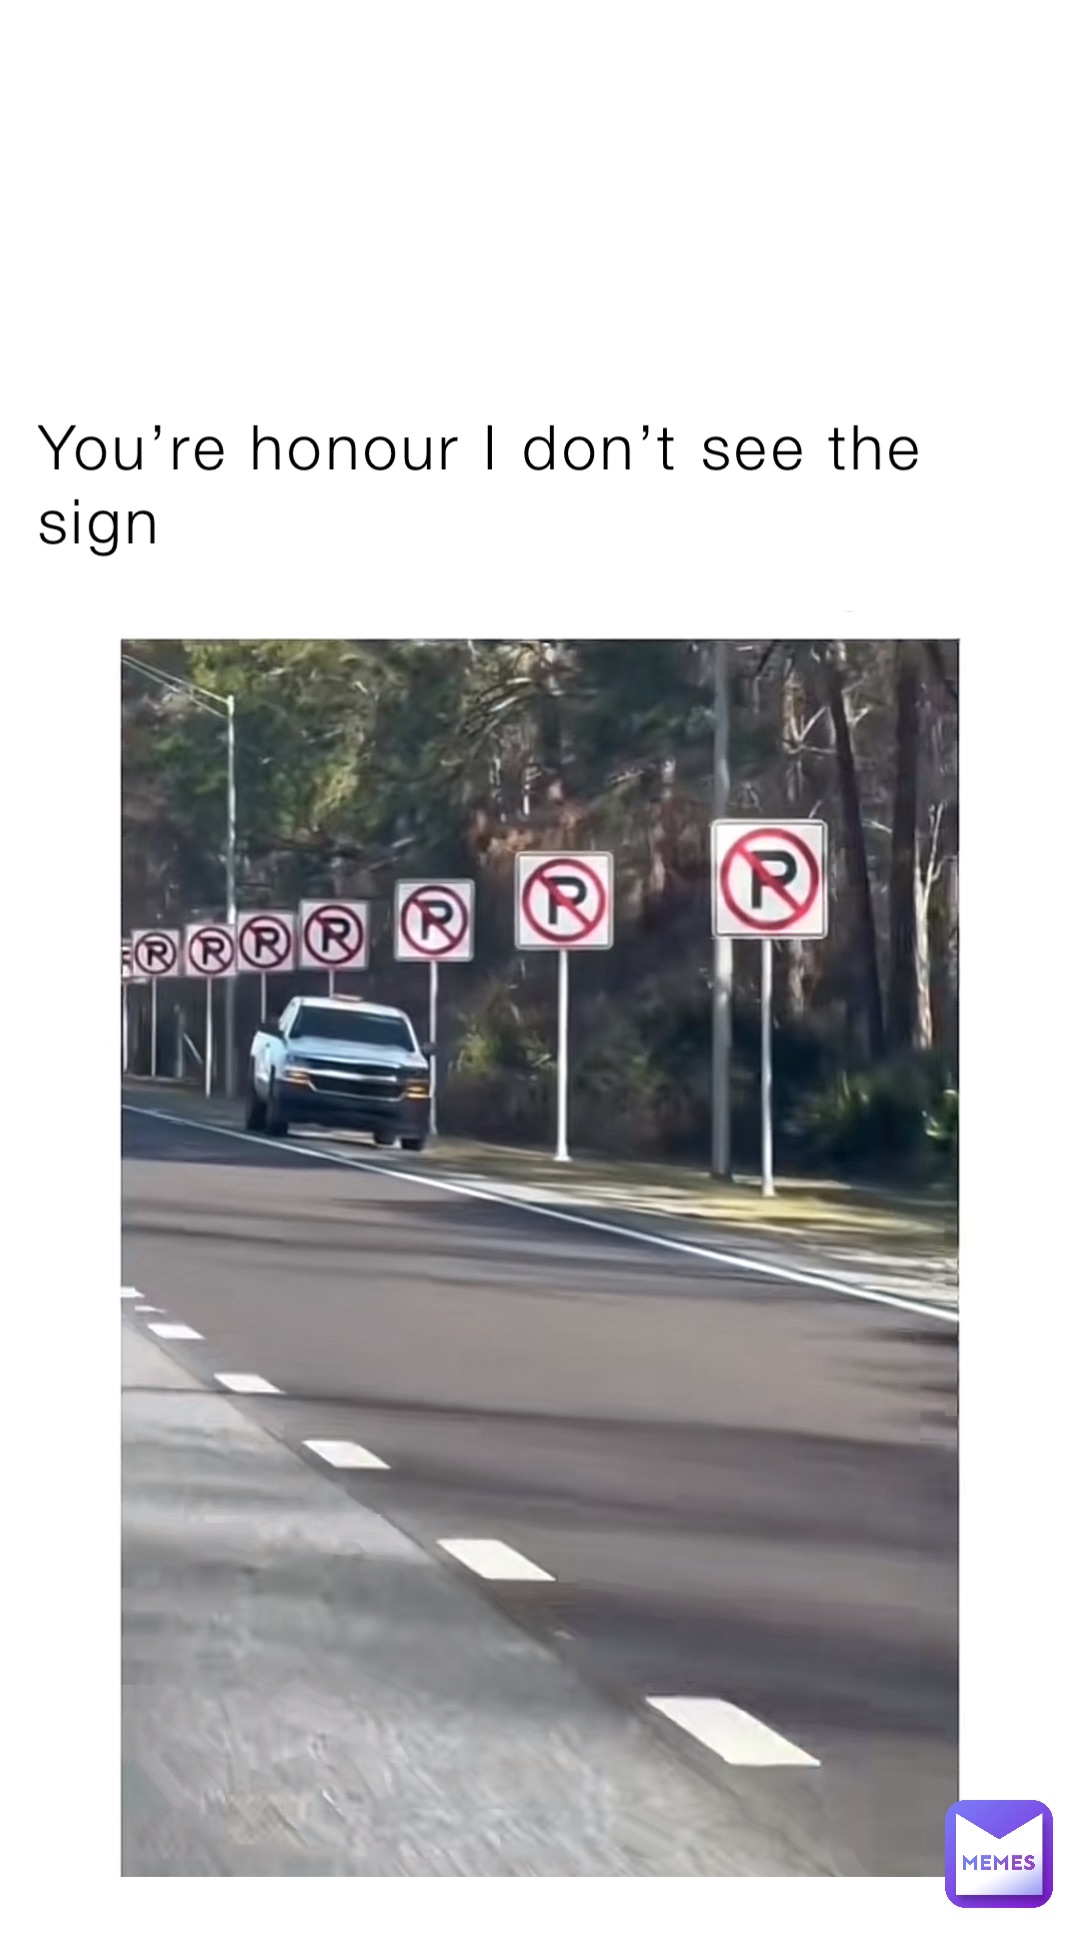 You’re honour I don’t see the sign